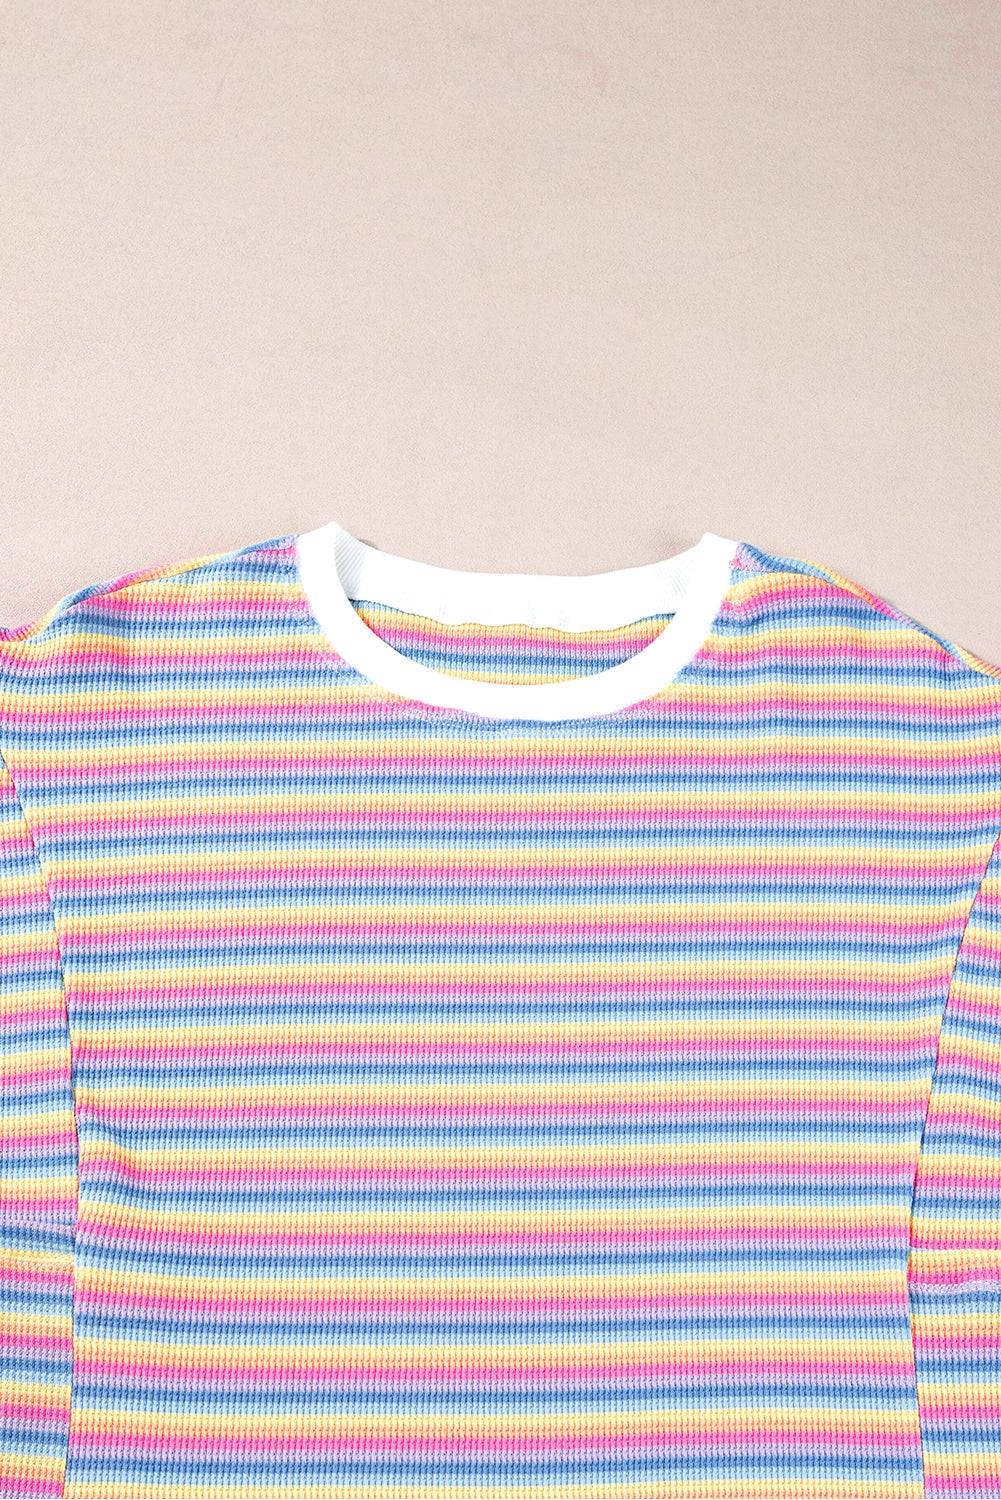 a colorful striped shirt hanging on a wall